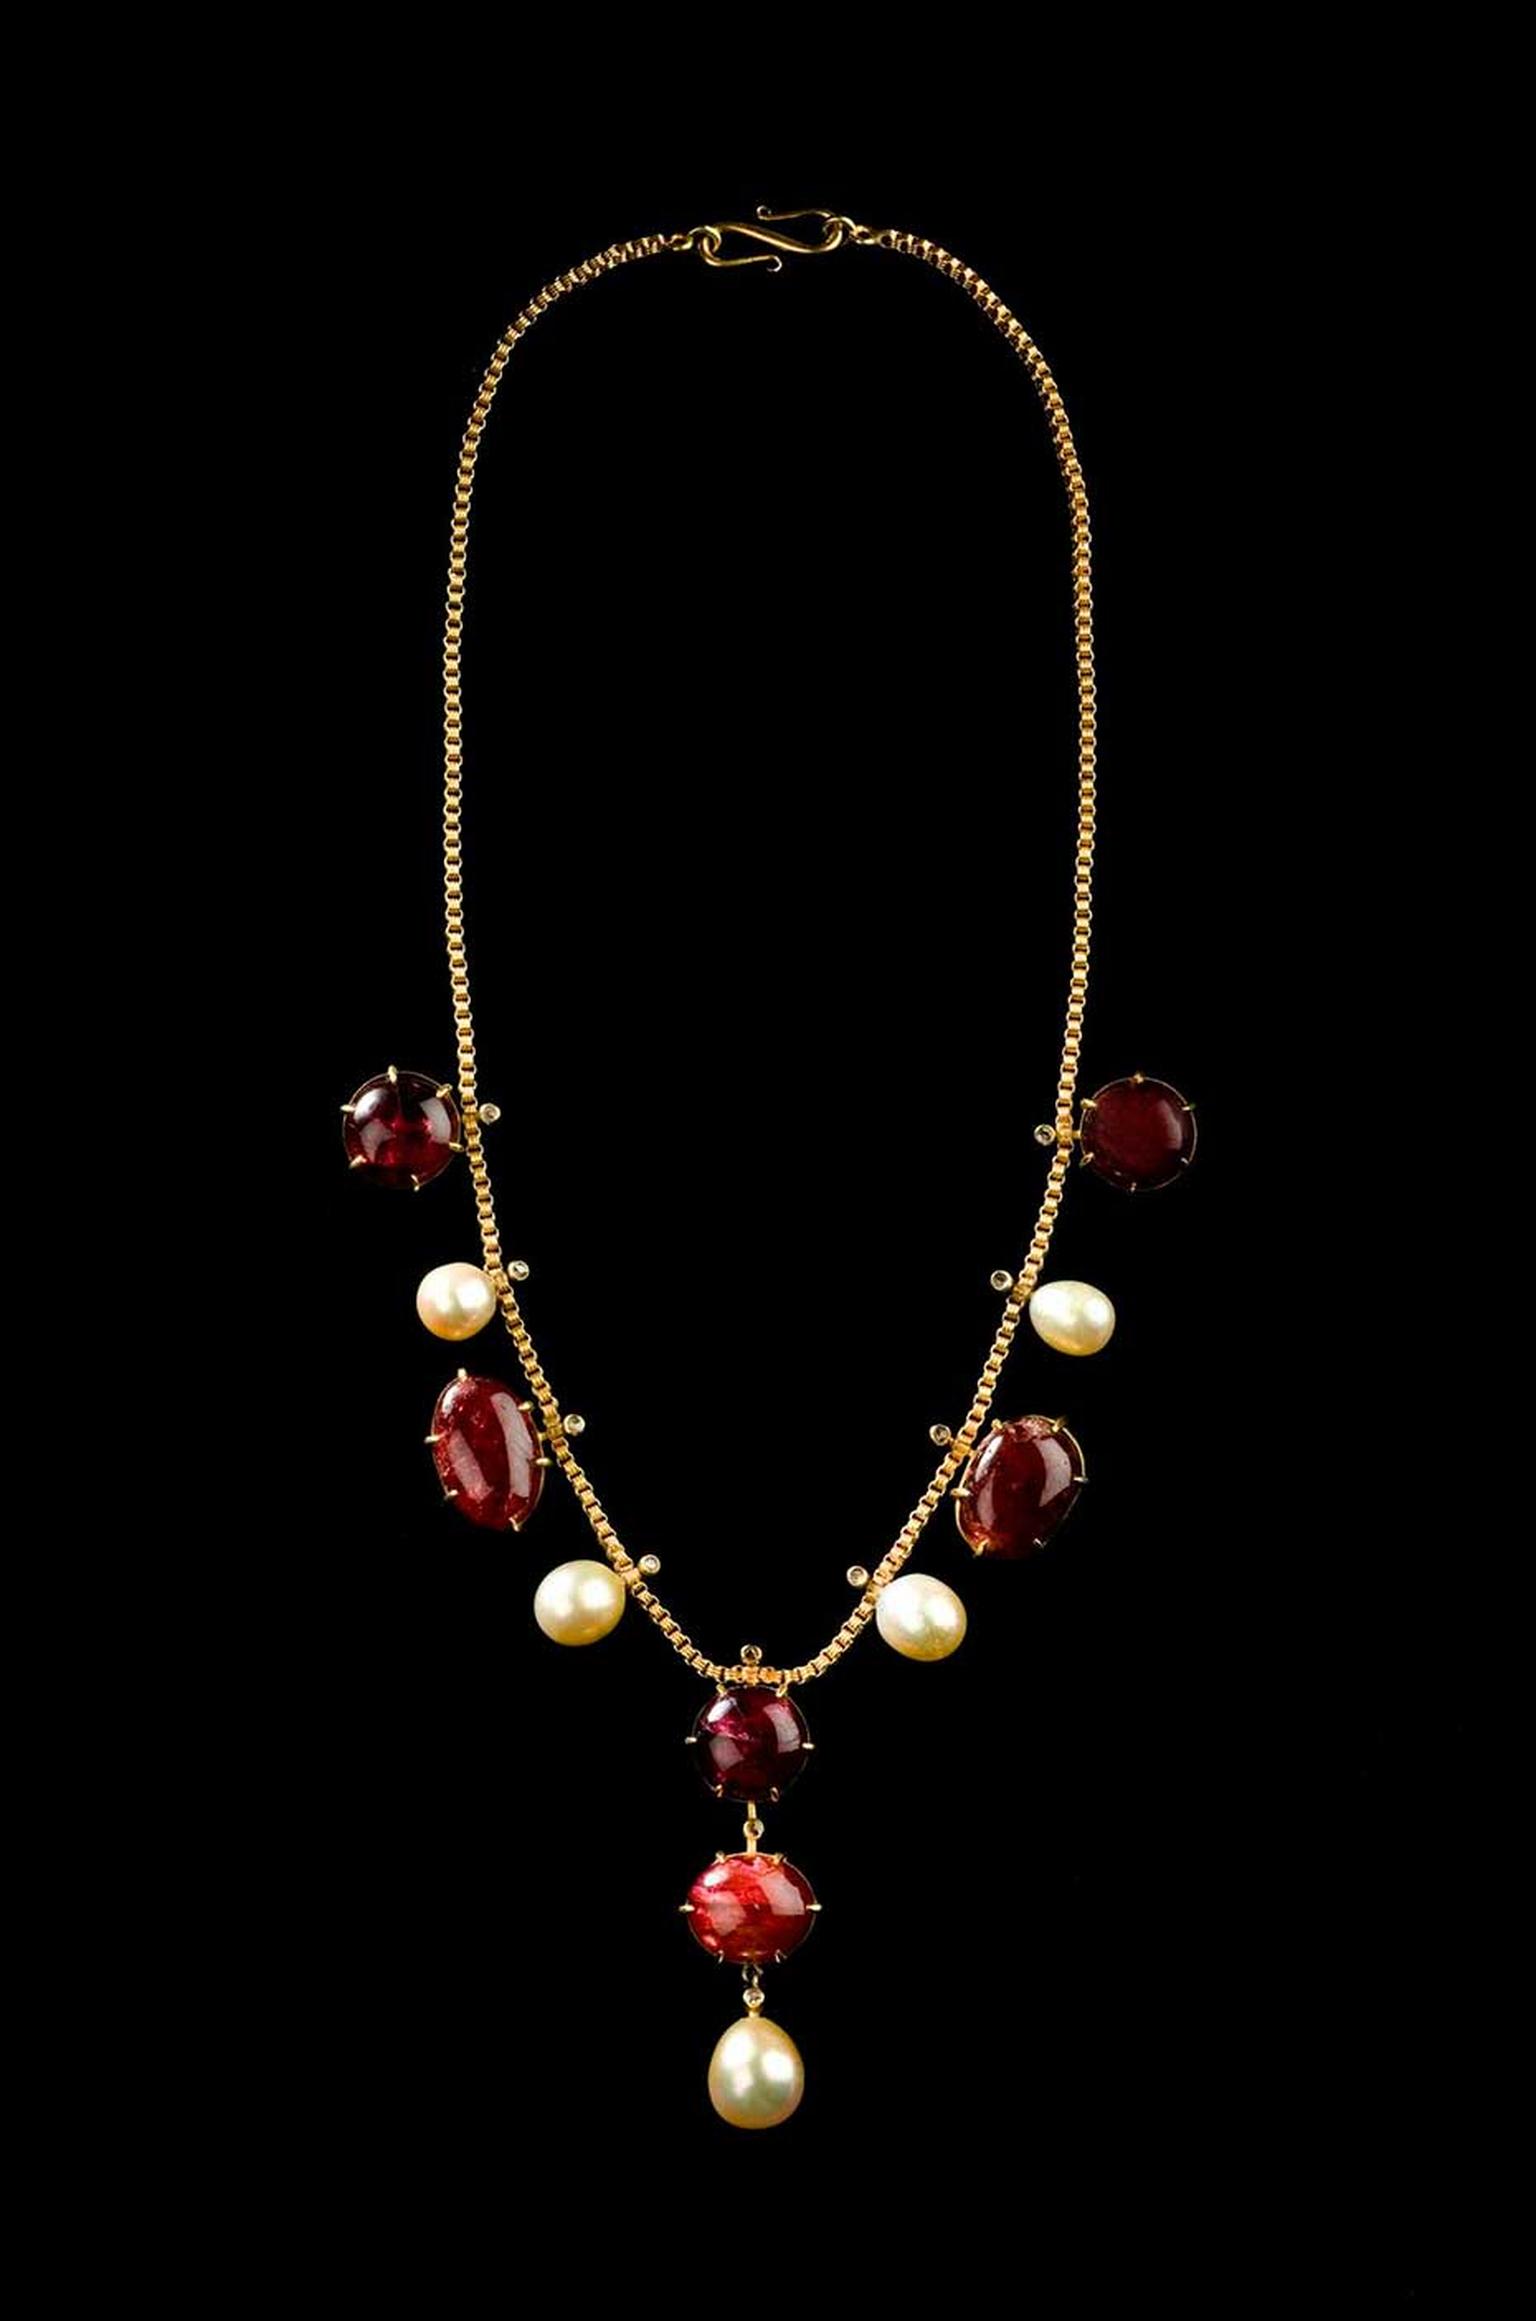 Ming dynasty cabochon ruby and natural pearl necklace at the Susan Ollemans Gallery.